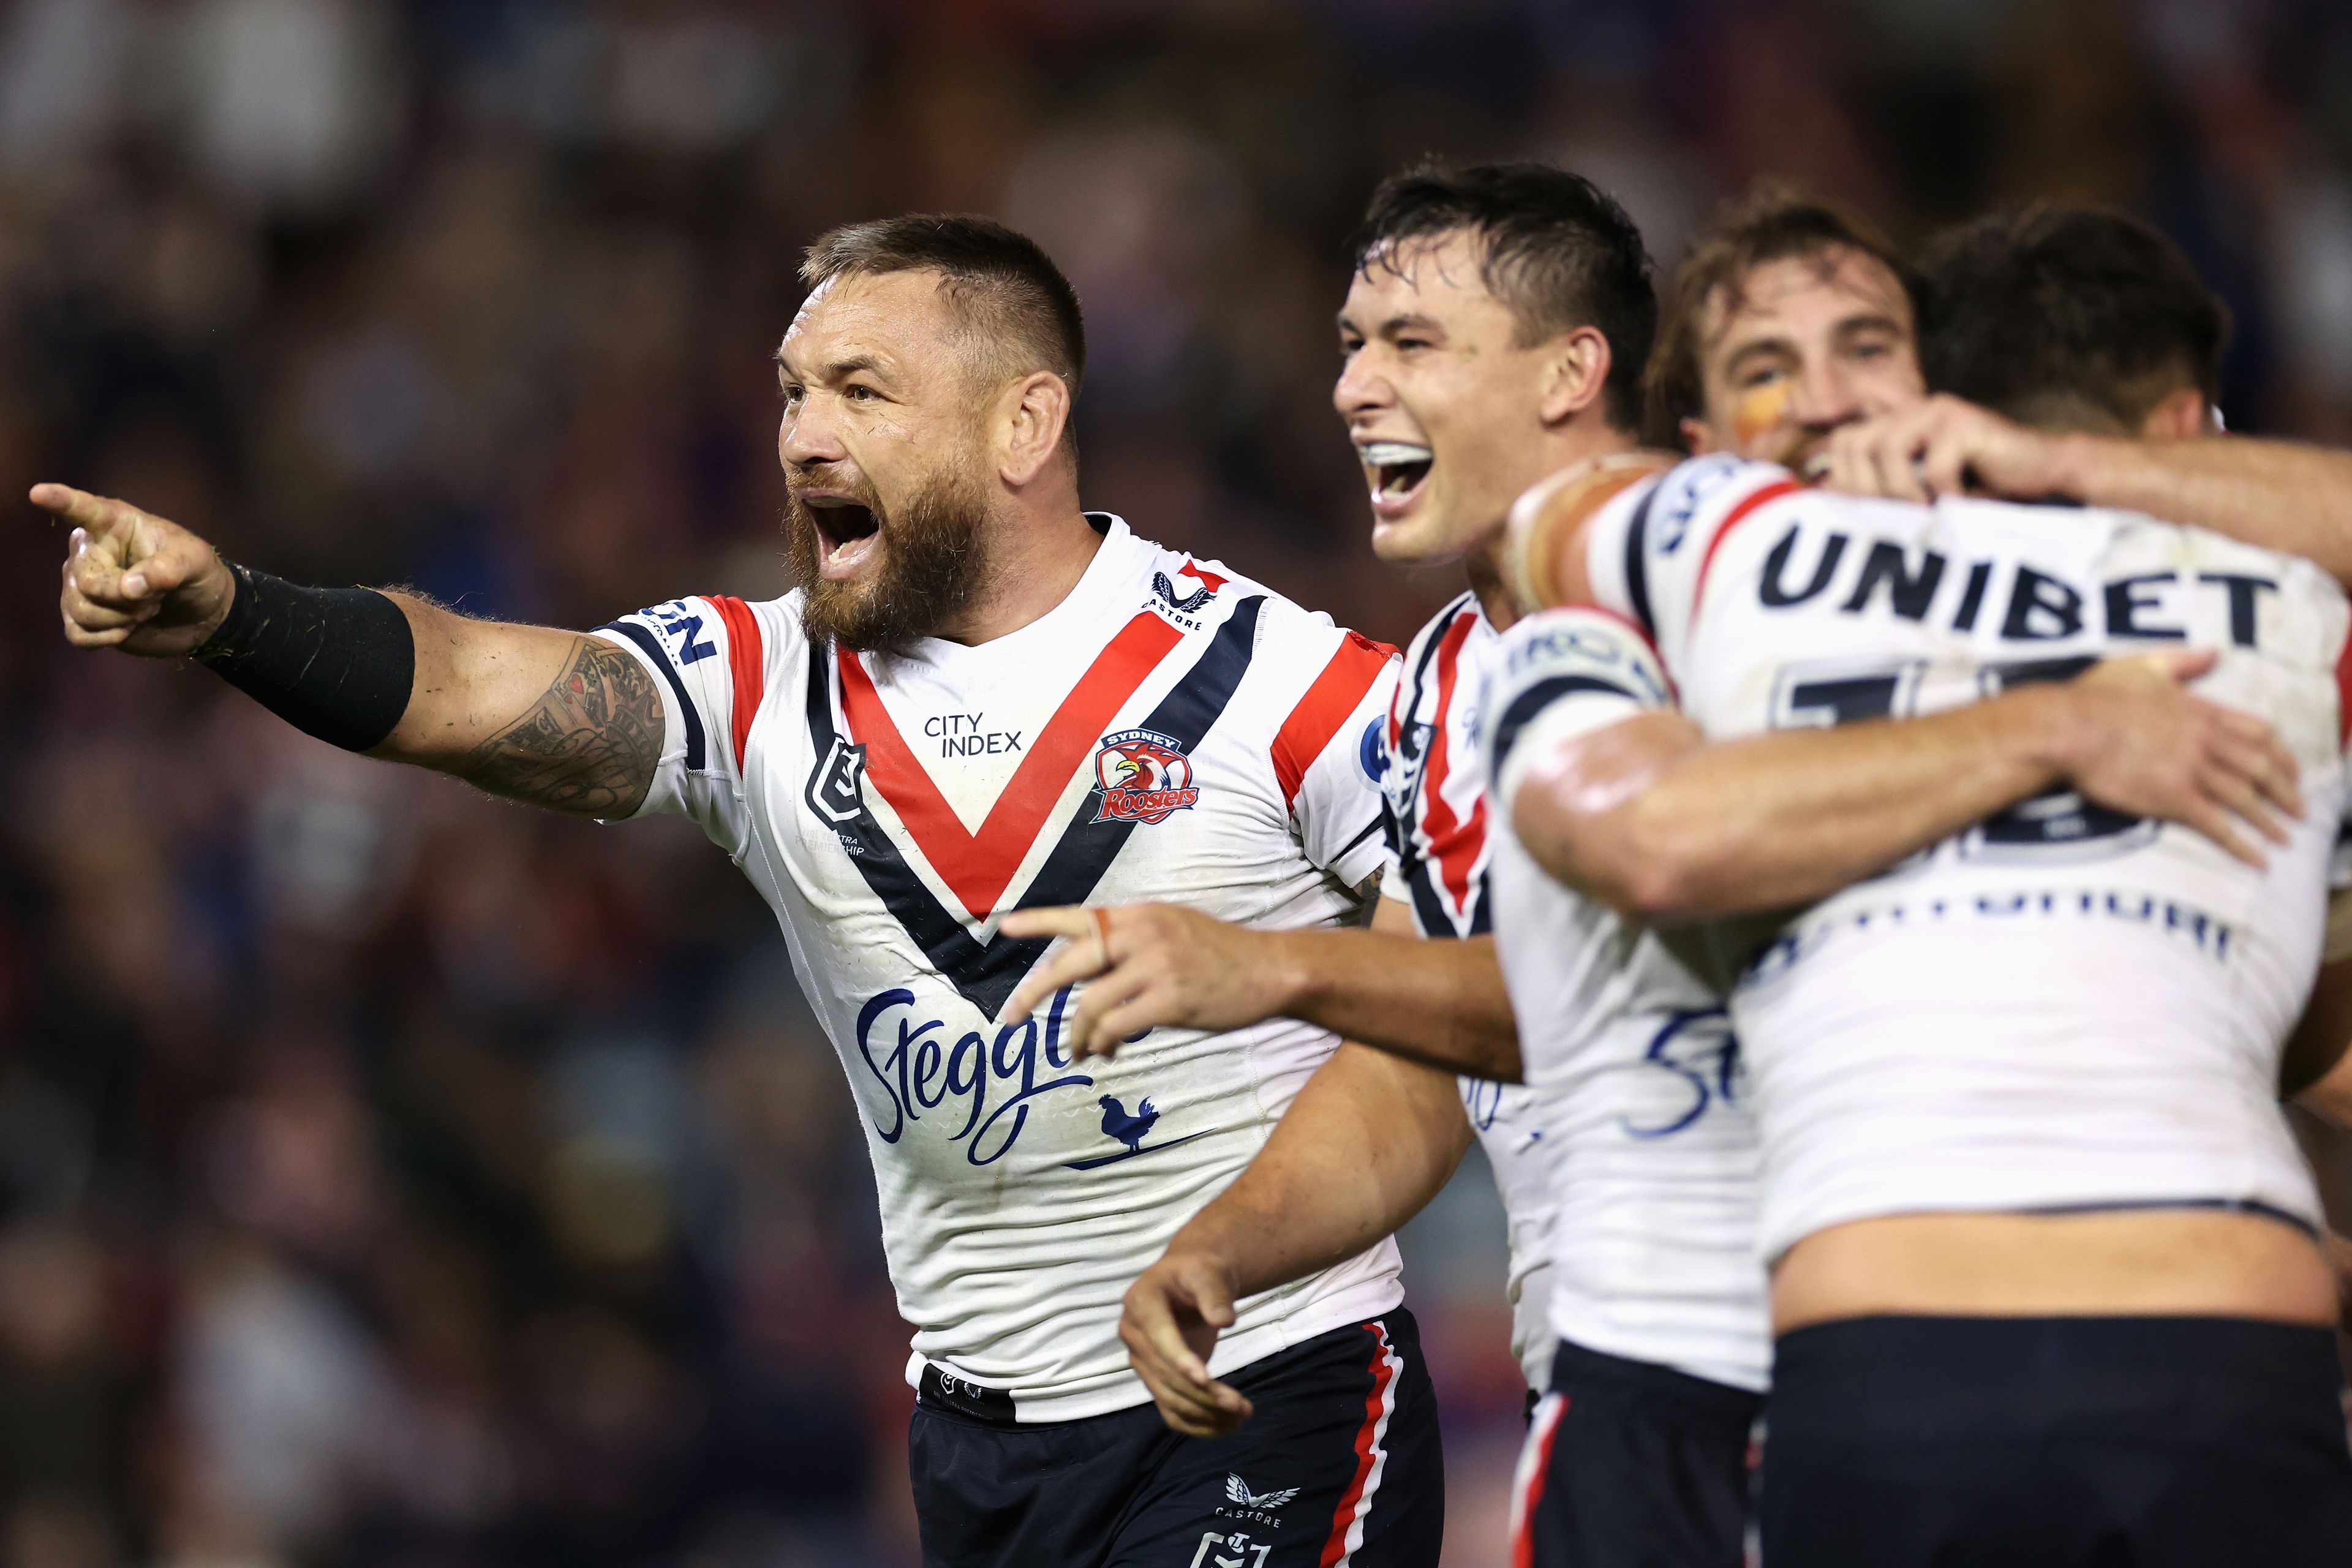 NRL Thursday AS IT HAPPENED: Roosters move into top eight with victory; Newcastle Knights bomb chances in final set as Roosters hold on; Andrew Johns dumbfounded as Kalyn Ponga returns despite injury